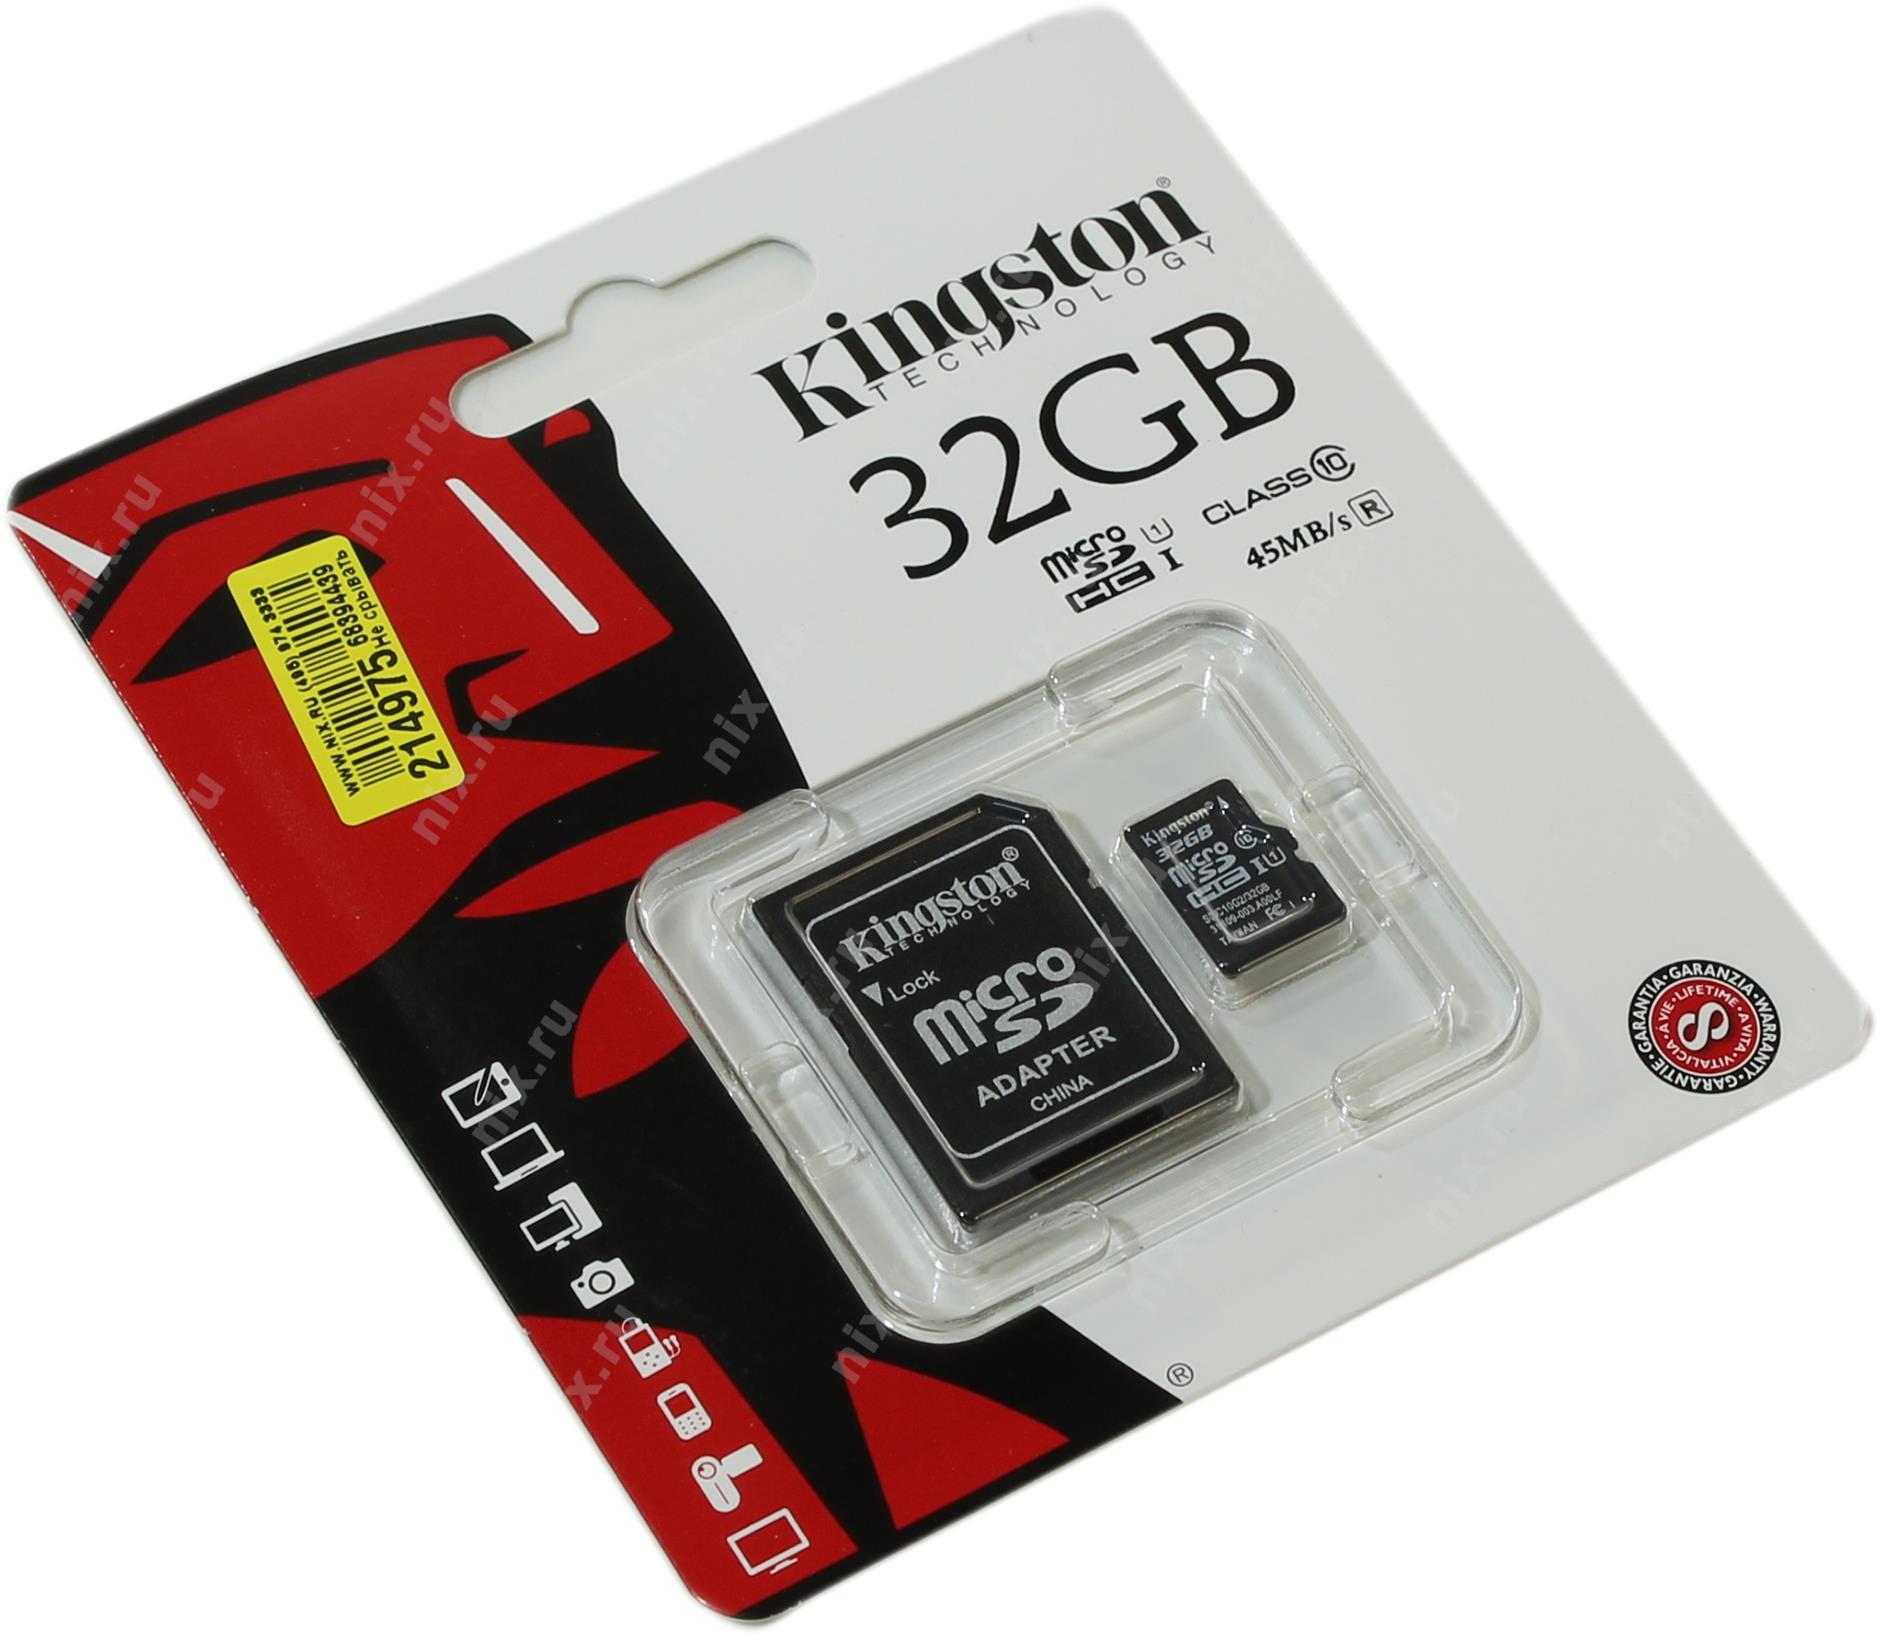   SDHC 32 Gb class10 SILICON POWER Ultra 30MB/s